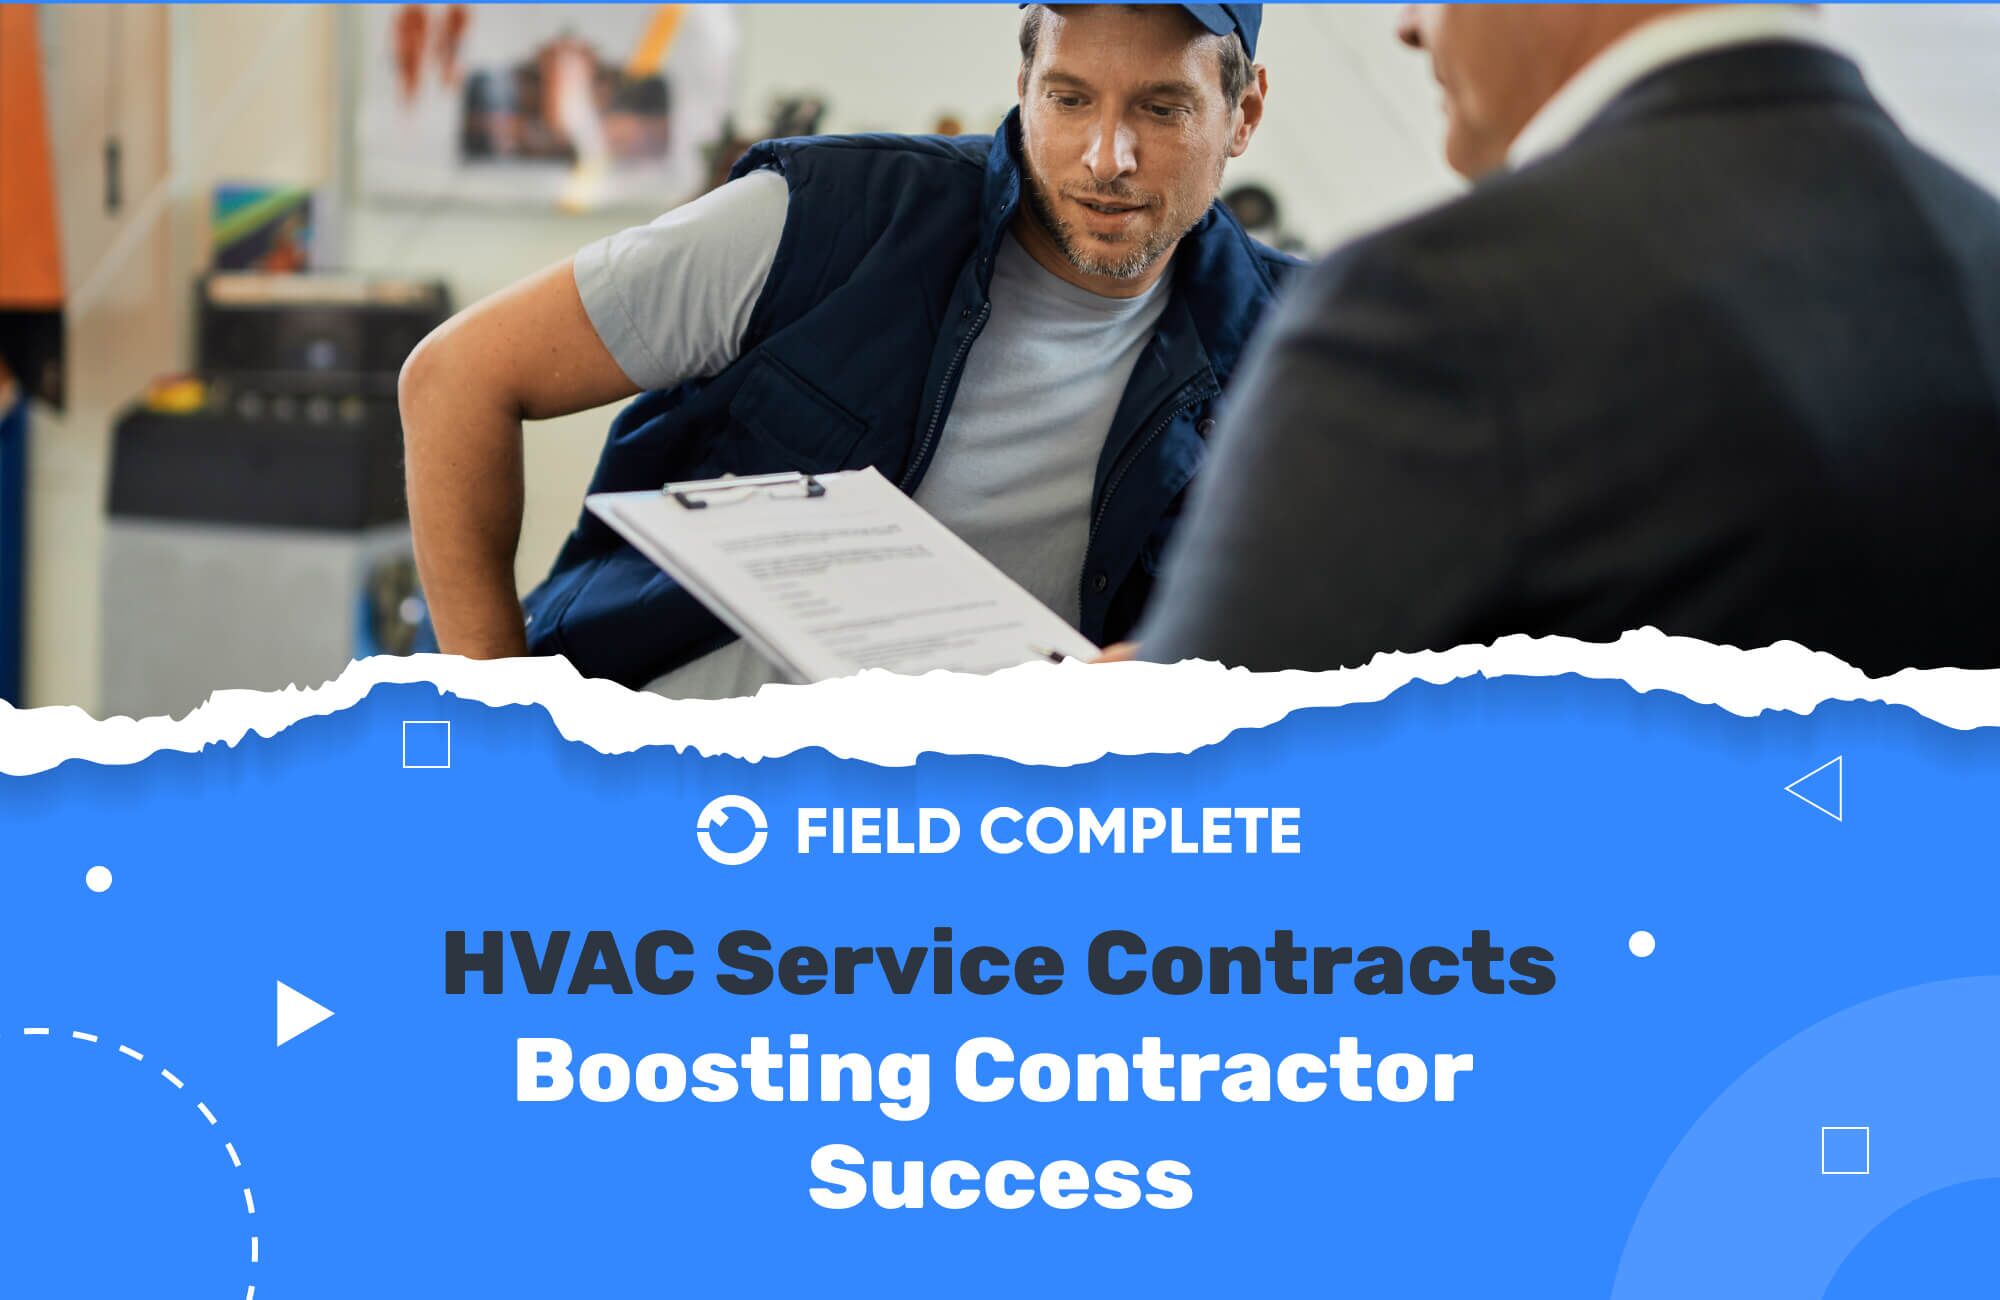 HVAC Service Contracts: Boosting Contractor Success